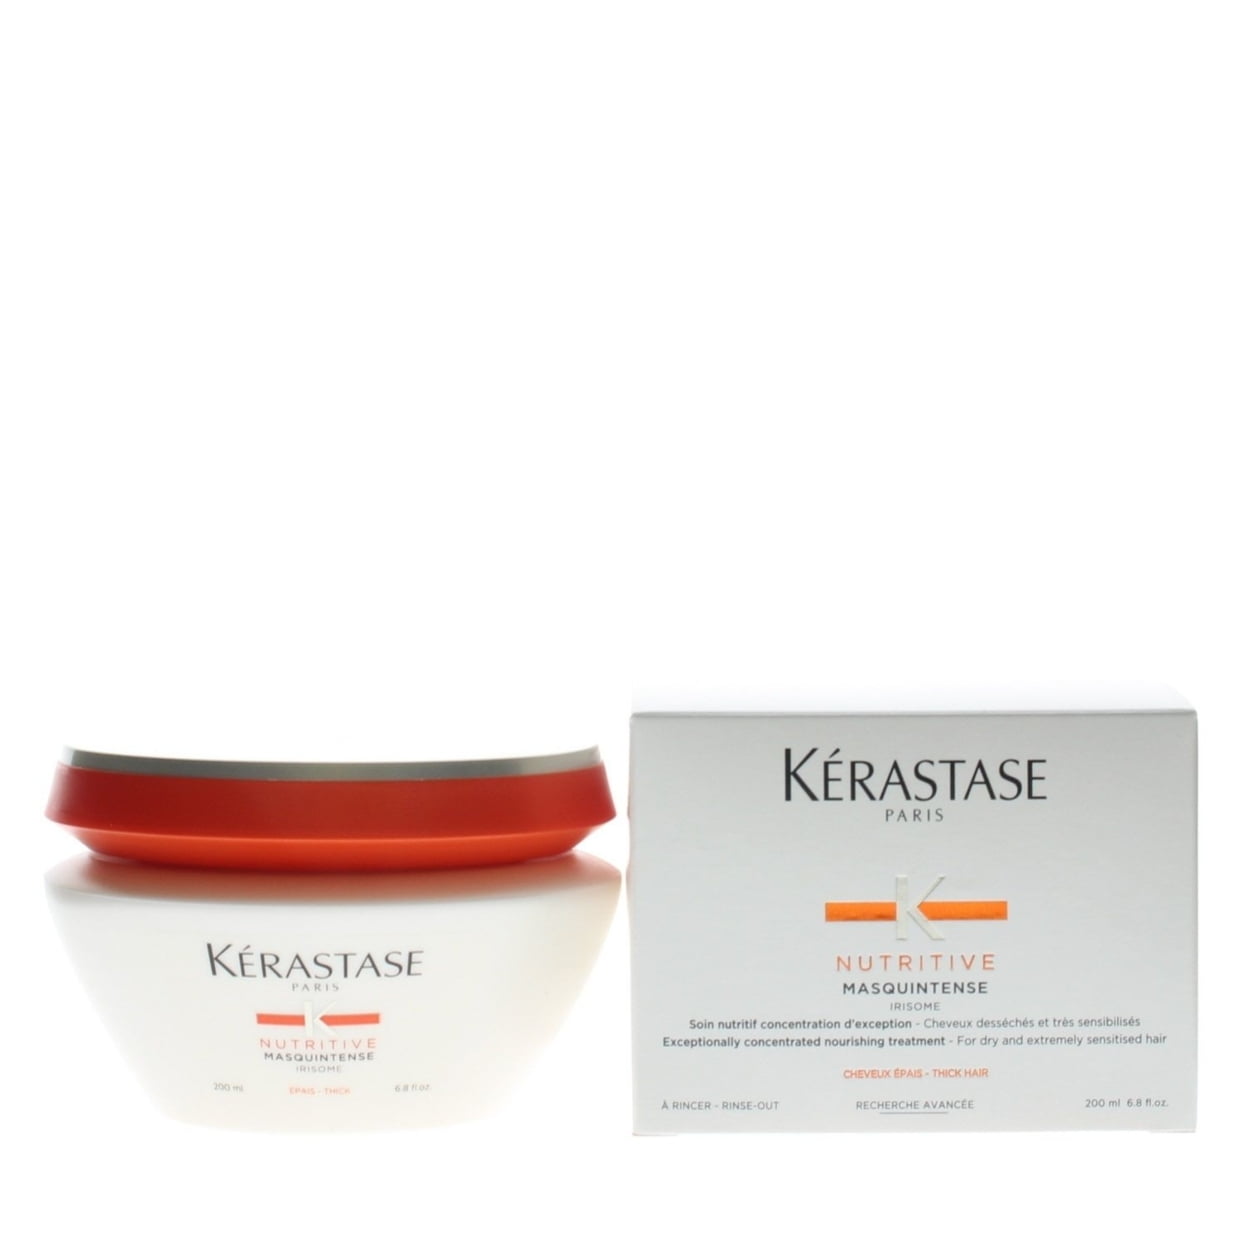 Nutritive Masquintense Irisome Exceptionally Concentrated Nourishing Treatment - Thick Hair 200ml/6.8oz - Walmart.com